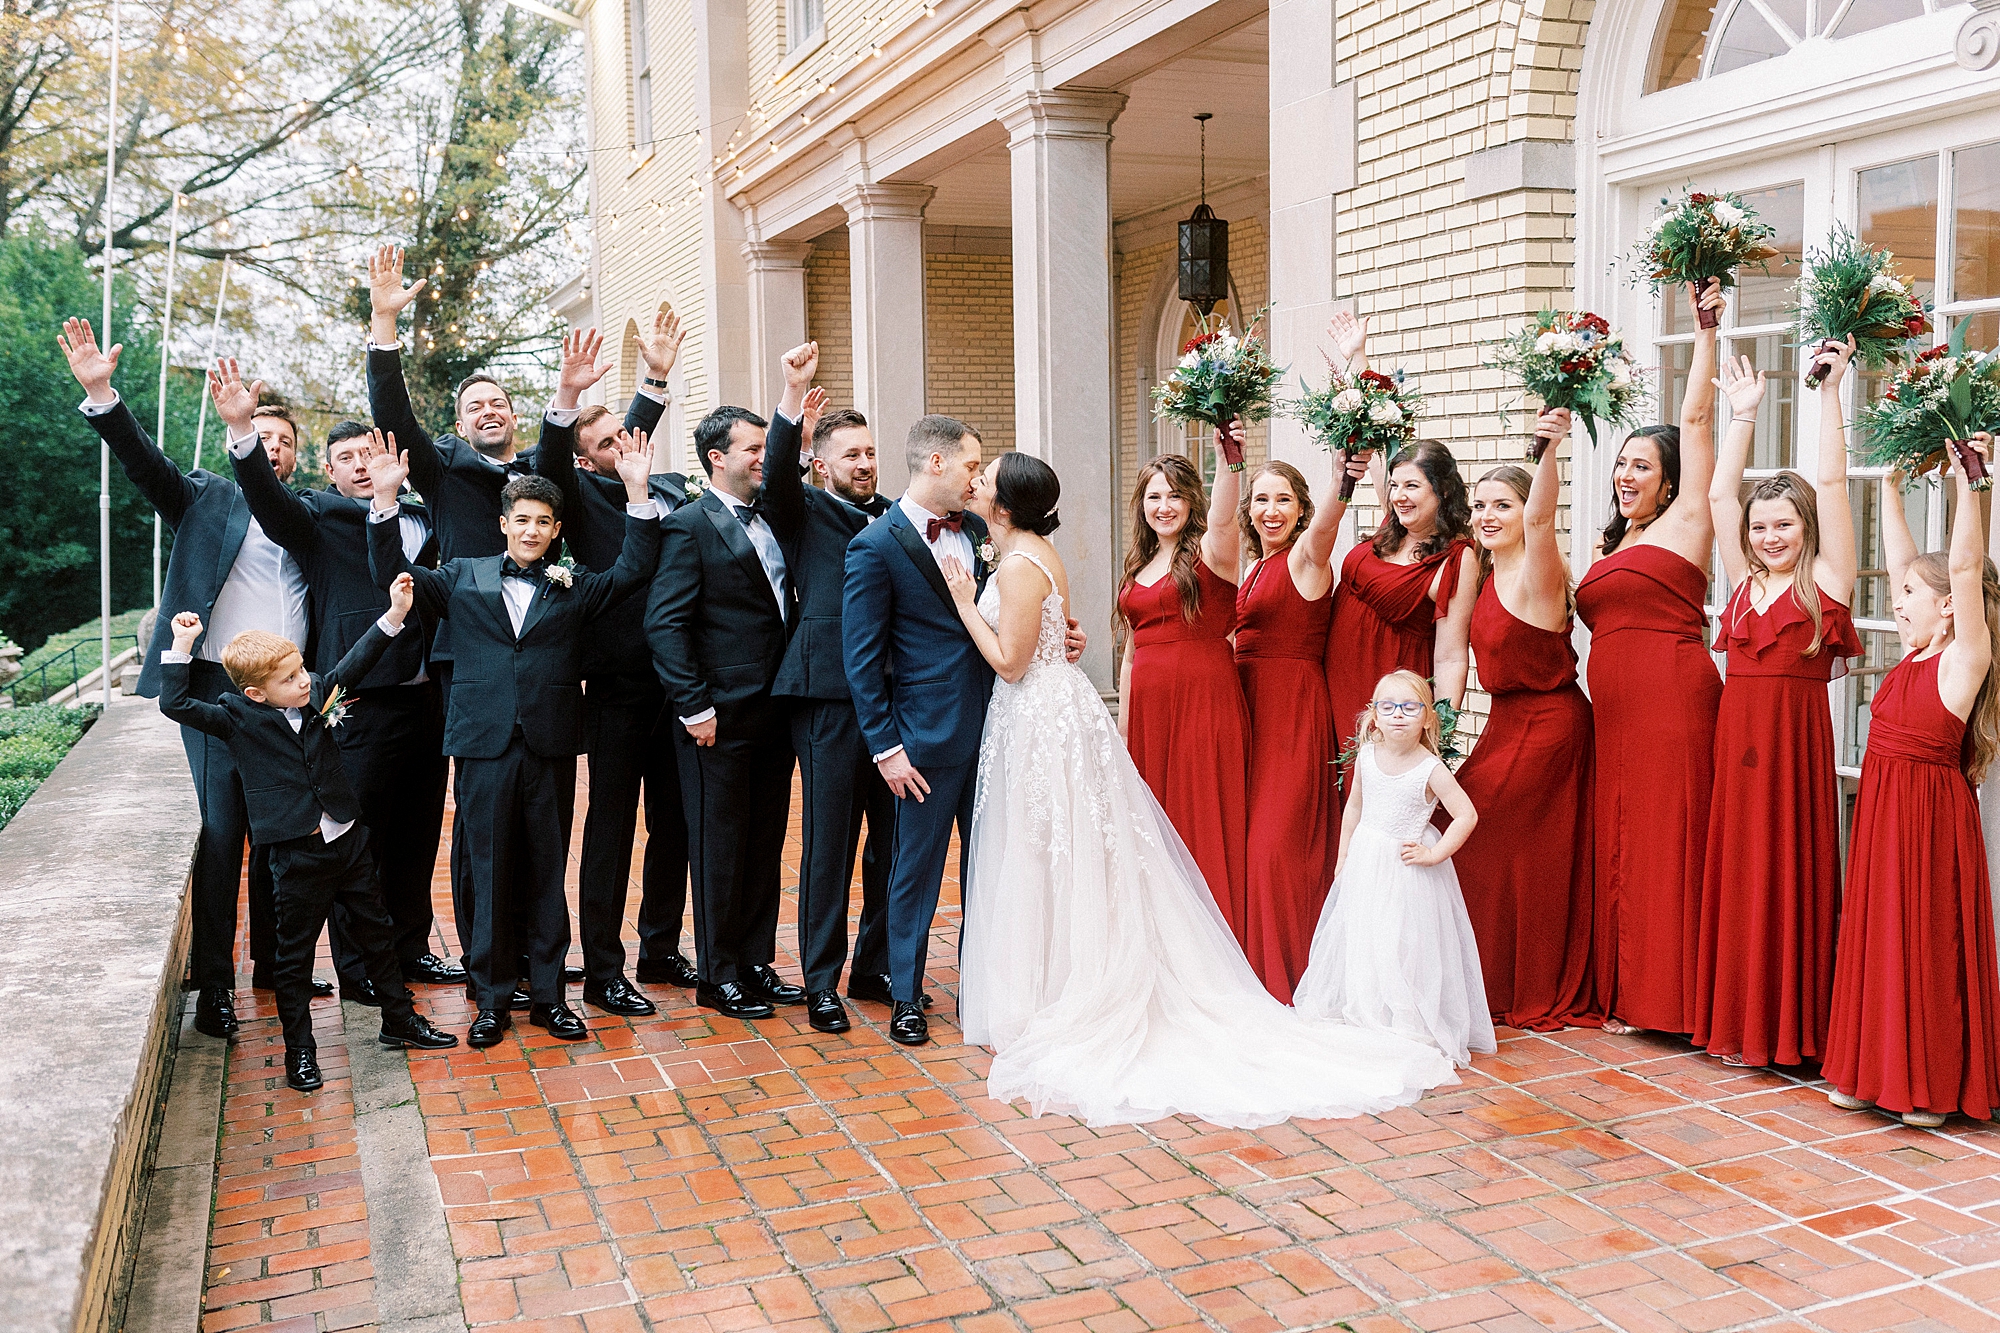 bride and groom kiss surrounded by wedding party cheering